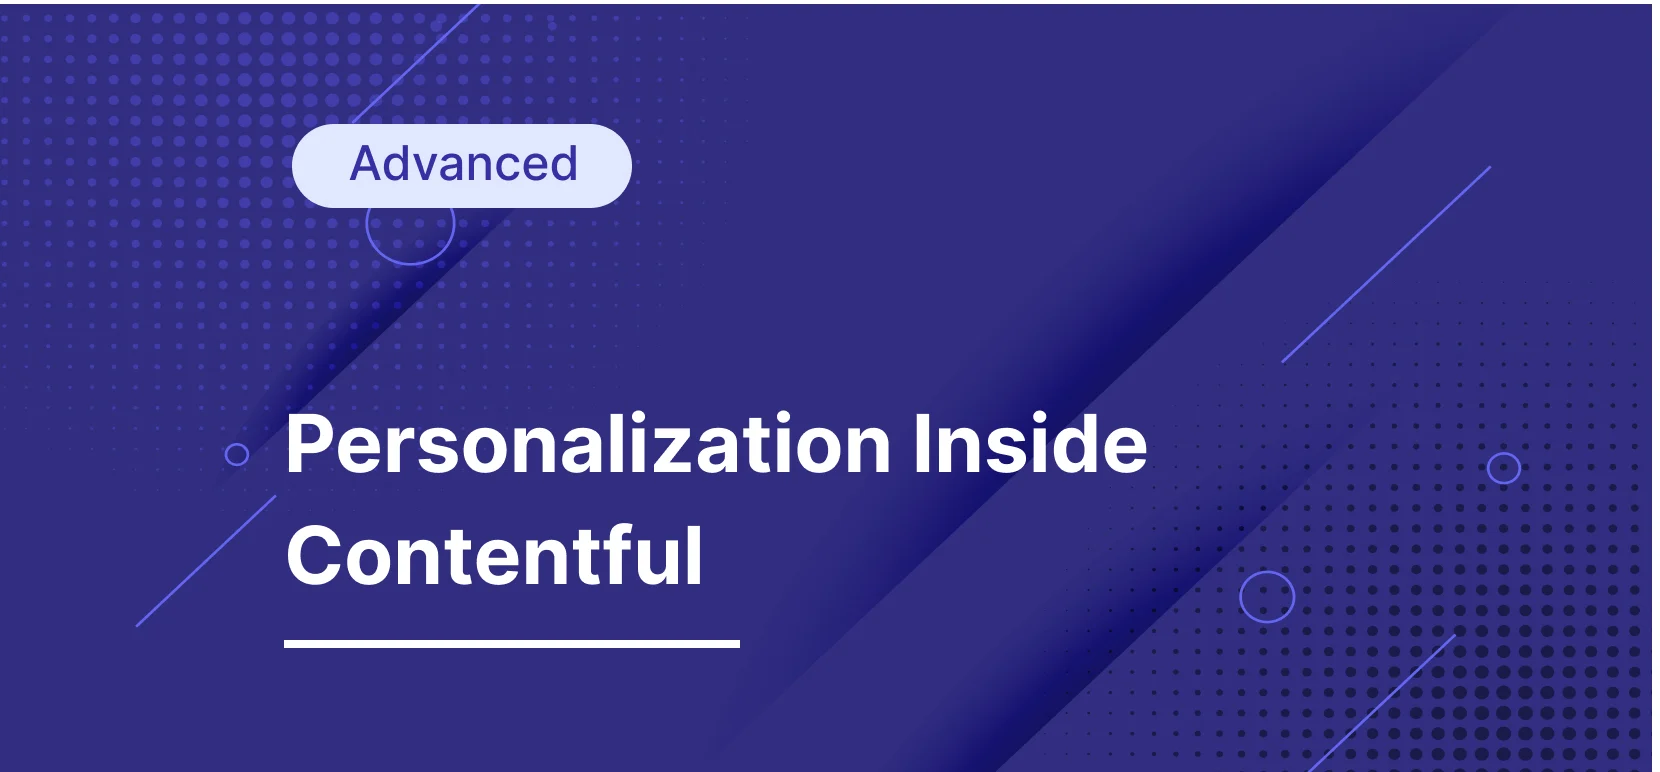 A Step-by-Step Content Personalization Guide for Contentful